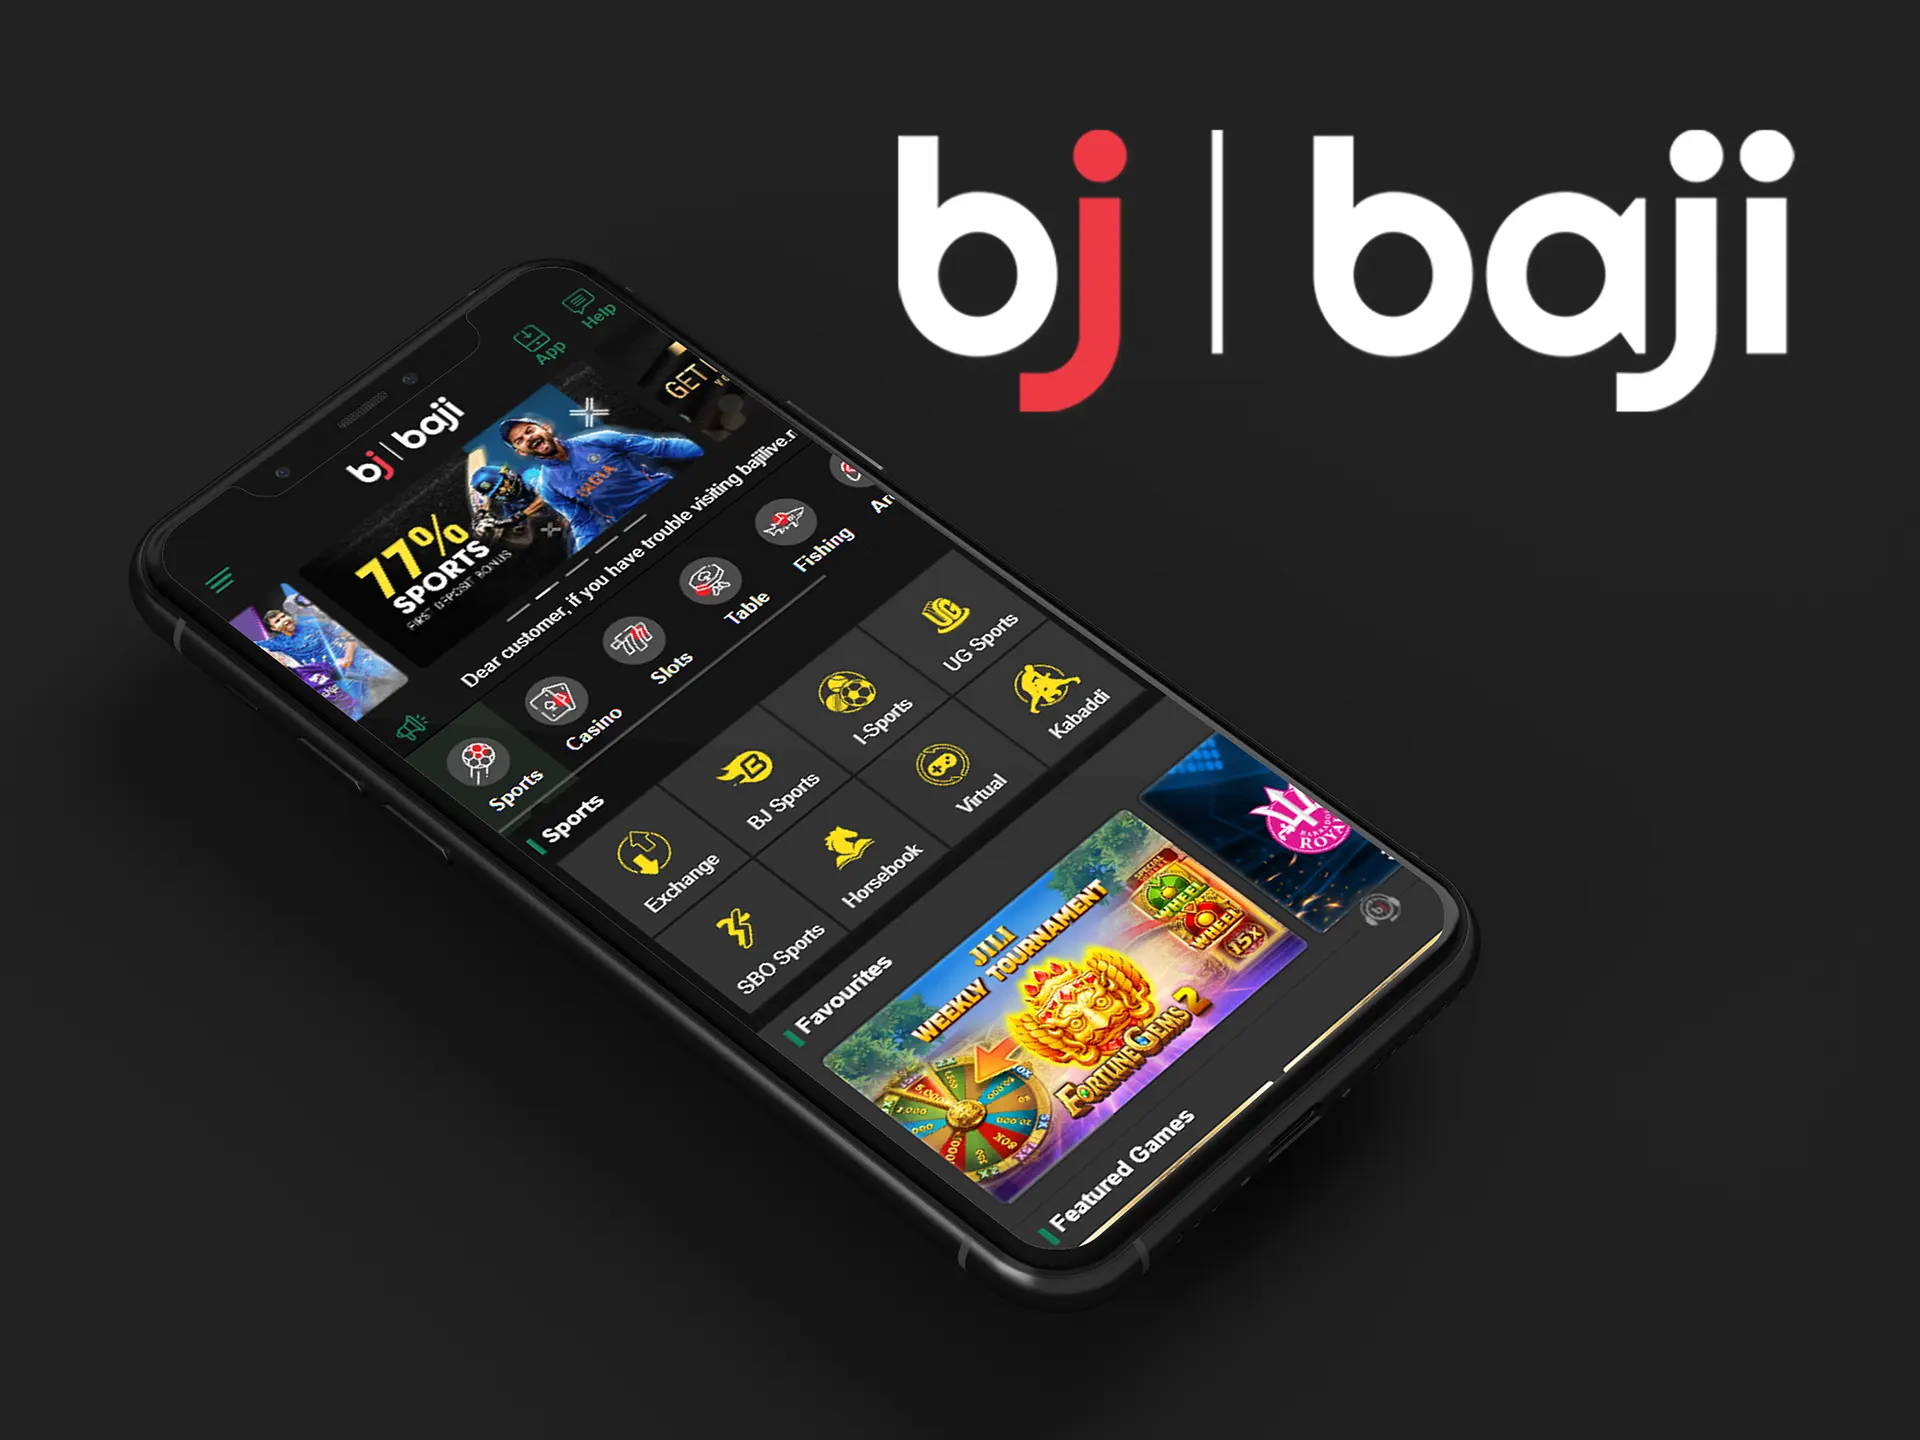 Register new account and start betting by using the Baji app.